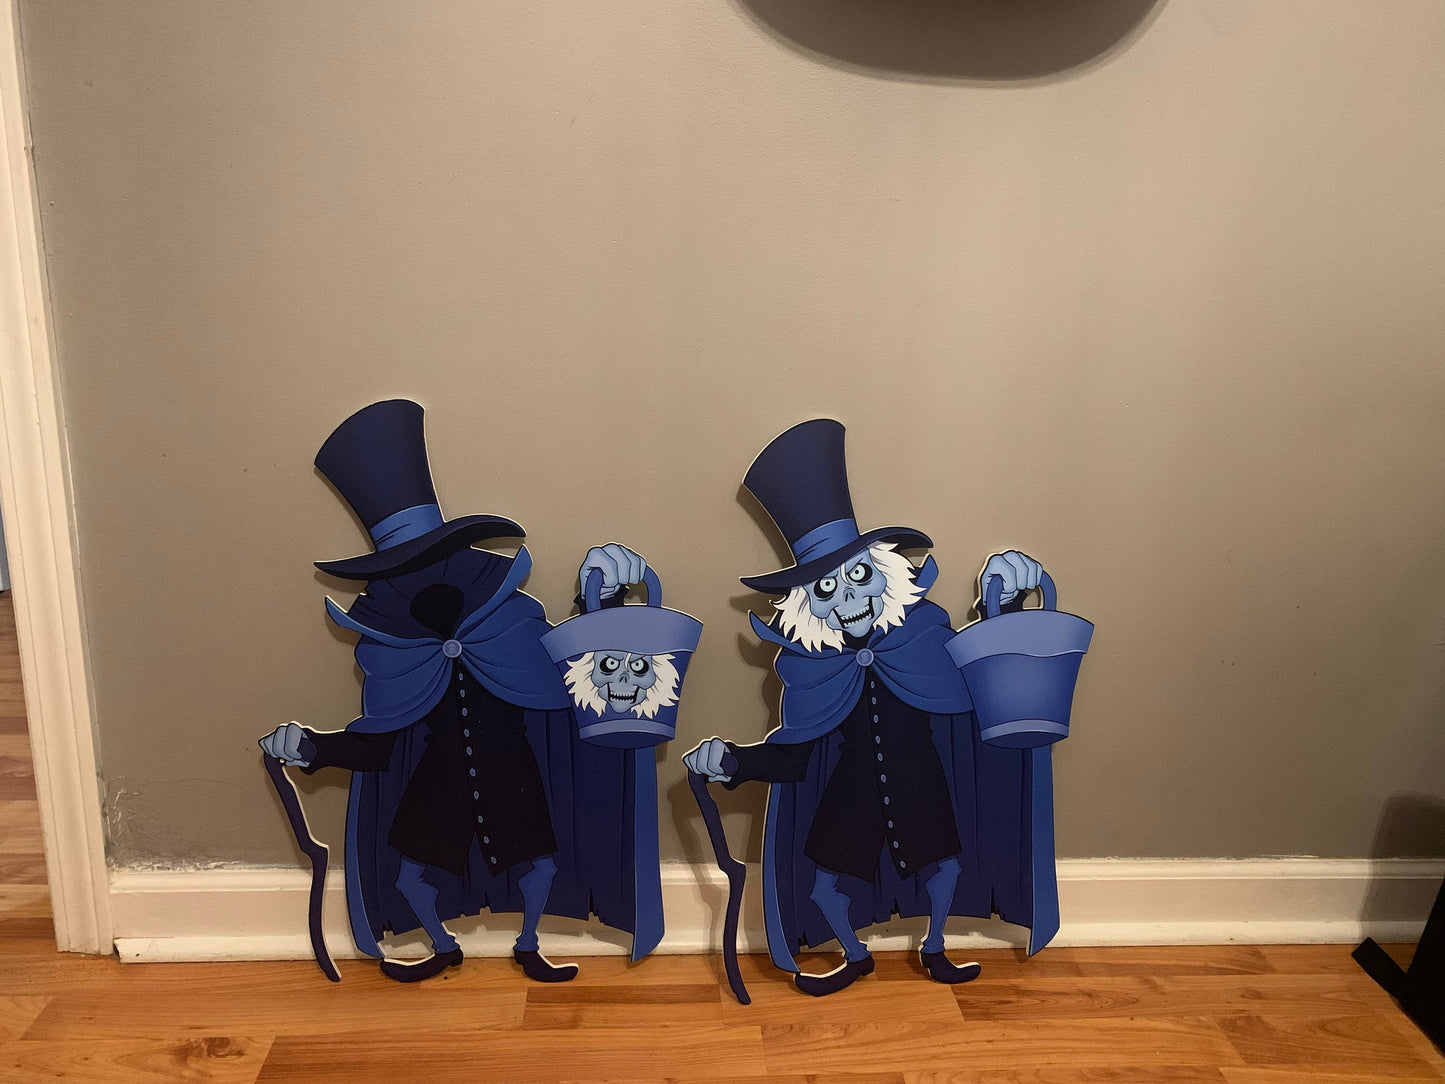 Haunted Mansion Hatbox Ghost Cutouts